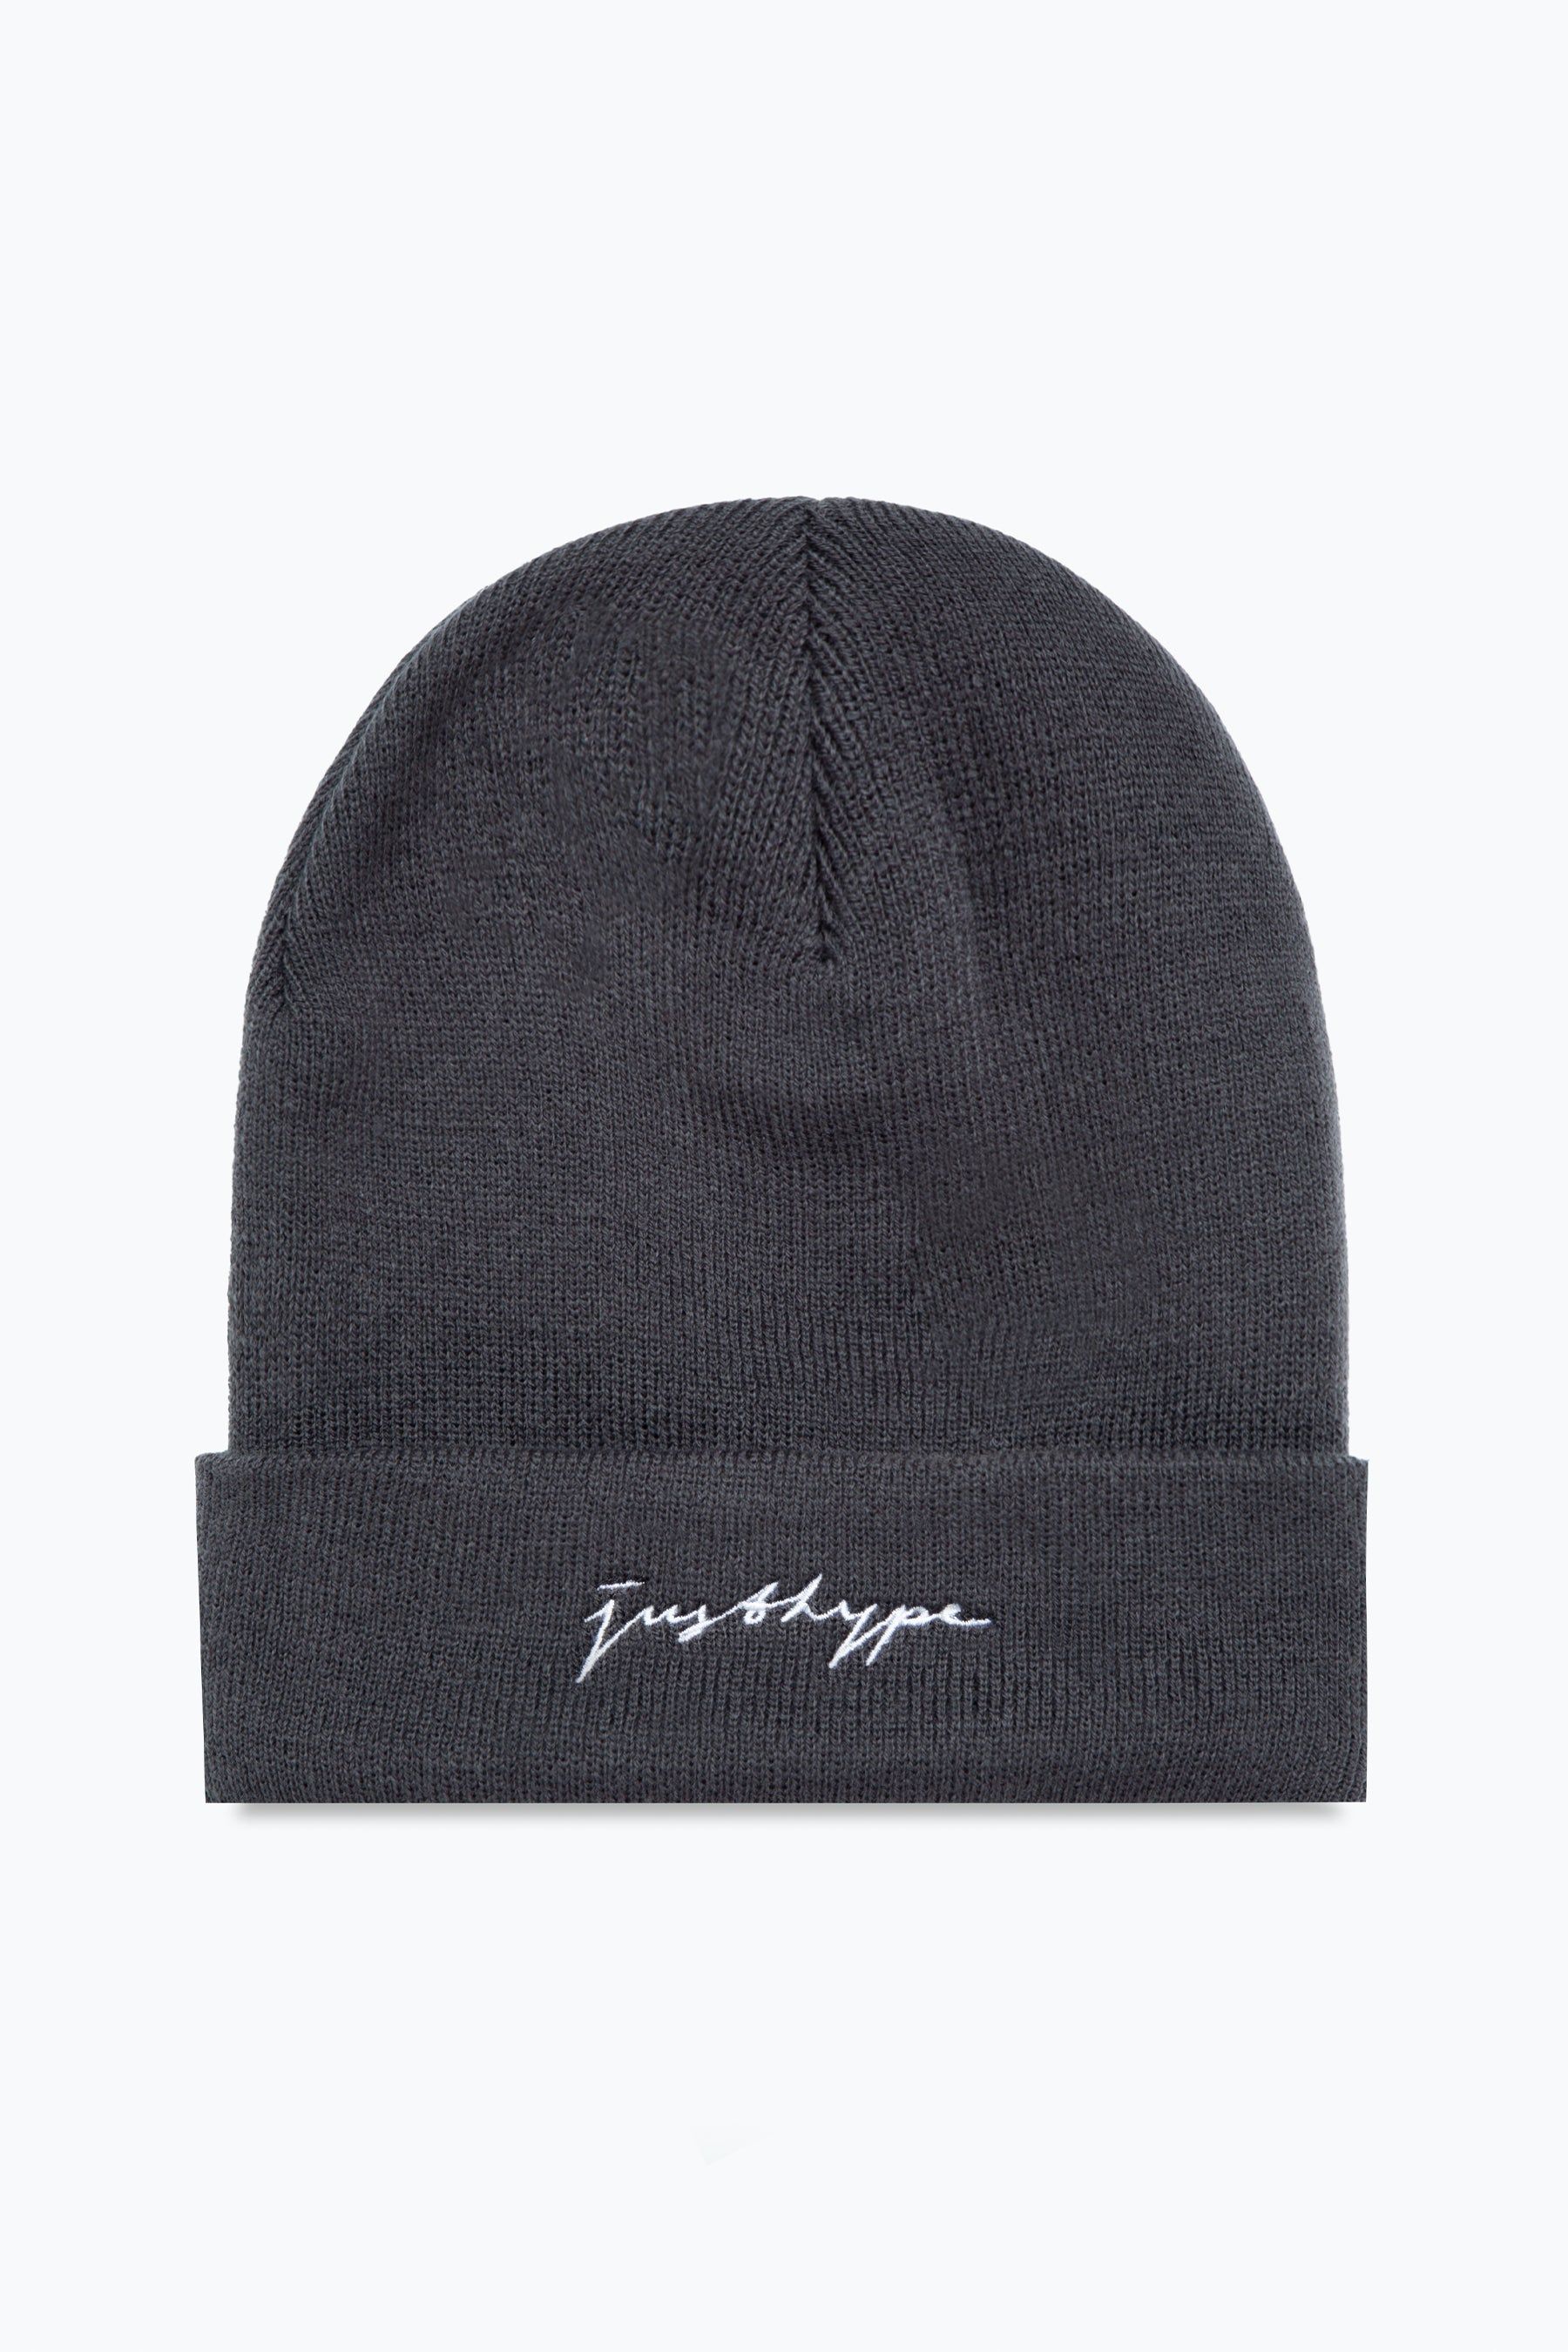 Keep your head warm with the HYPE. grey scribble beanie. In a one-size fit, this is perfect for adults. In a grey all over soft-touch fabric in double knit for the ultimate comfort. Finished with a cuff design and the new HYPE. signature logo in a contrasting white woven on the front. Machine wash inside out at 30 degrees.